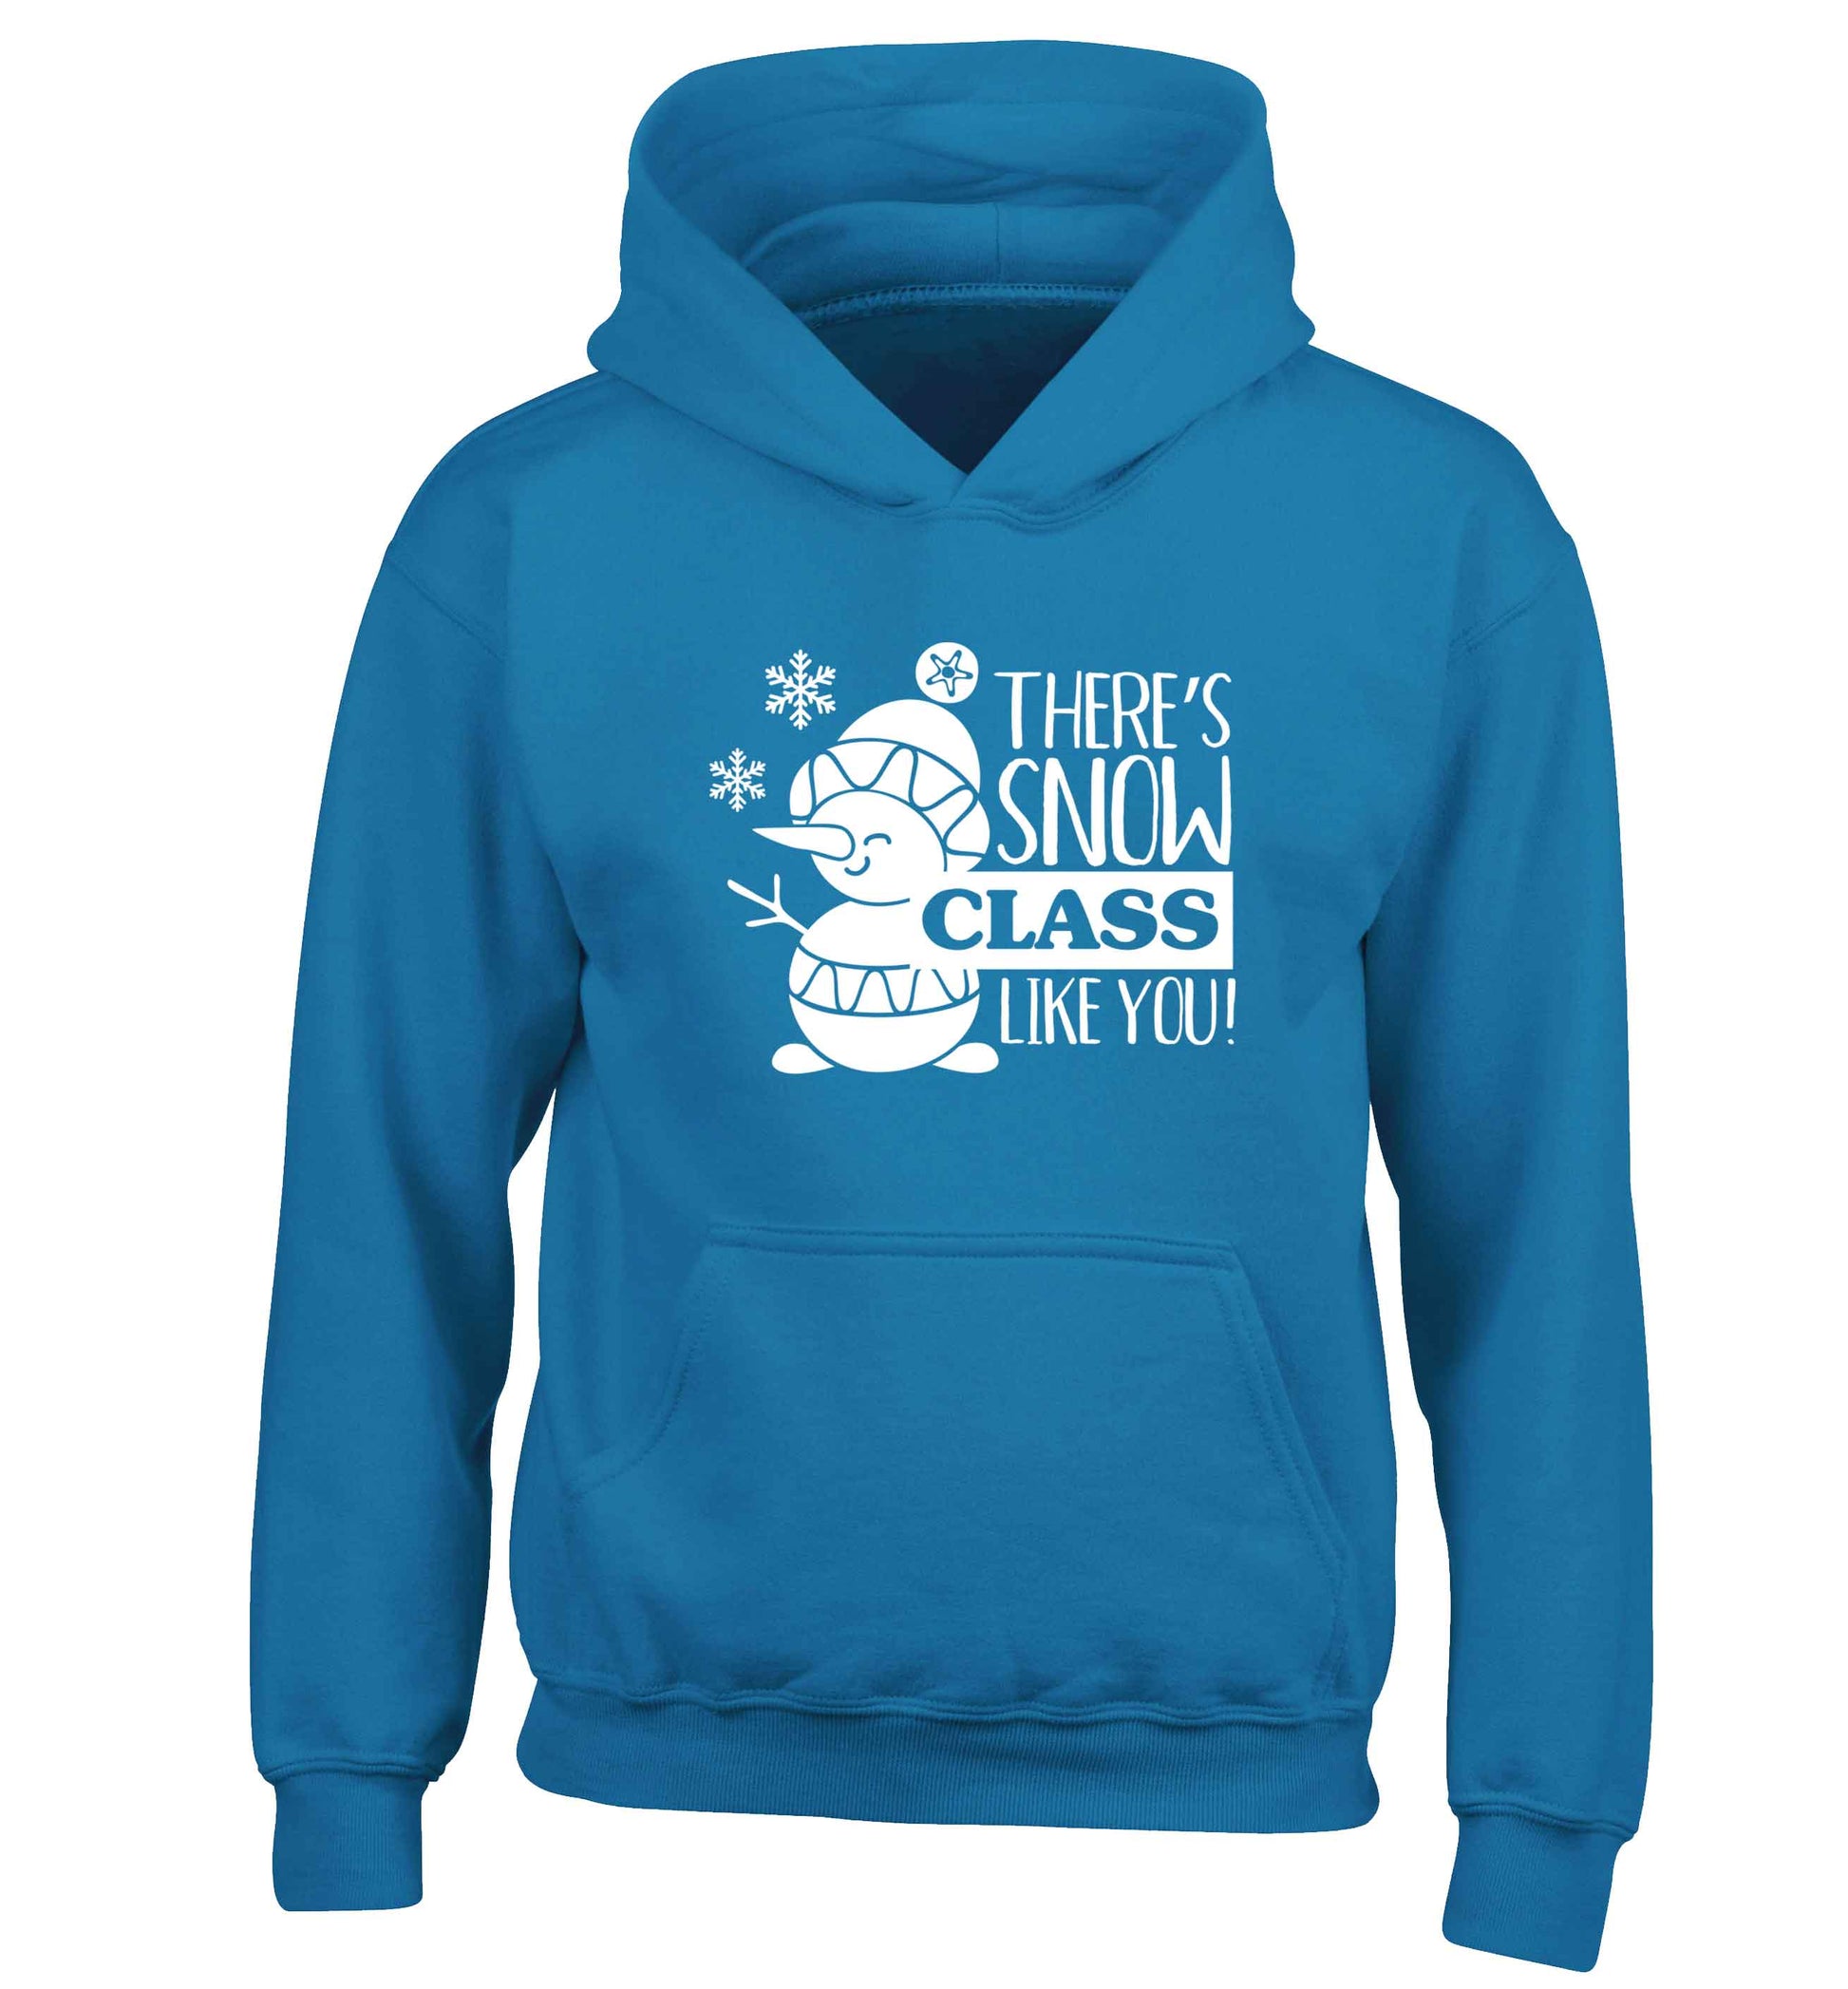 There's snow class like you children's blue hoodie 12-13 Years